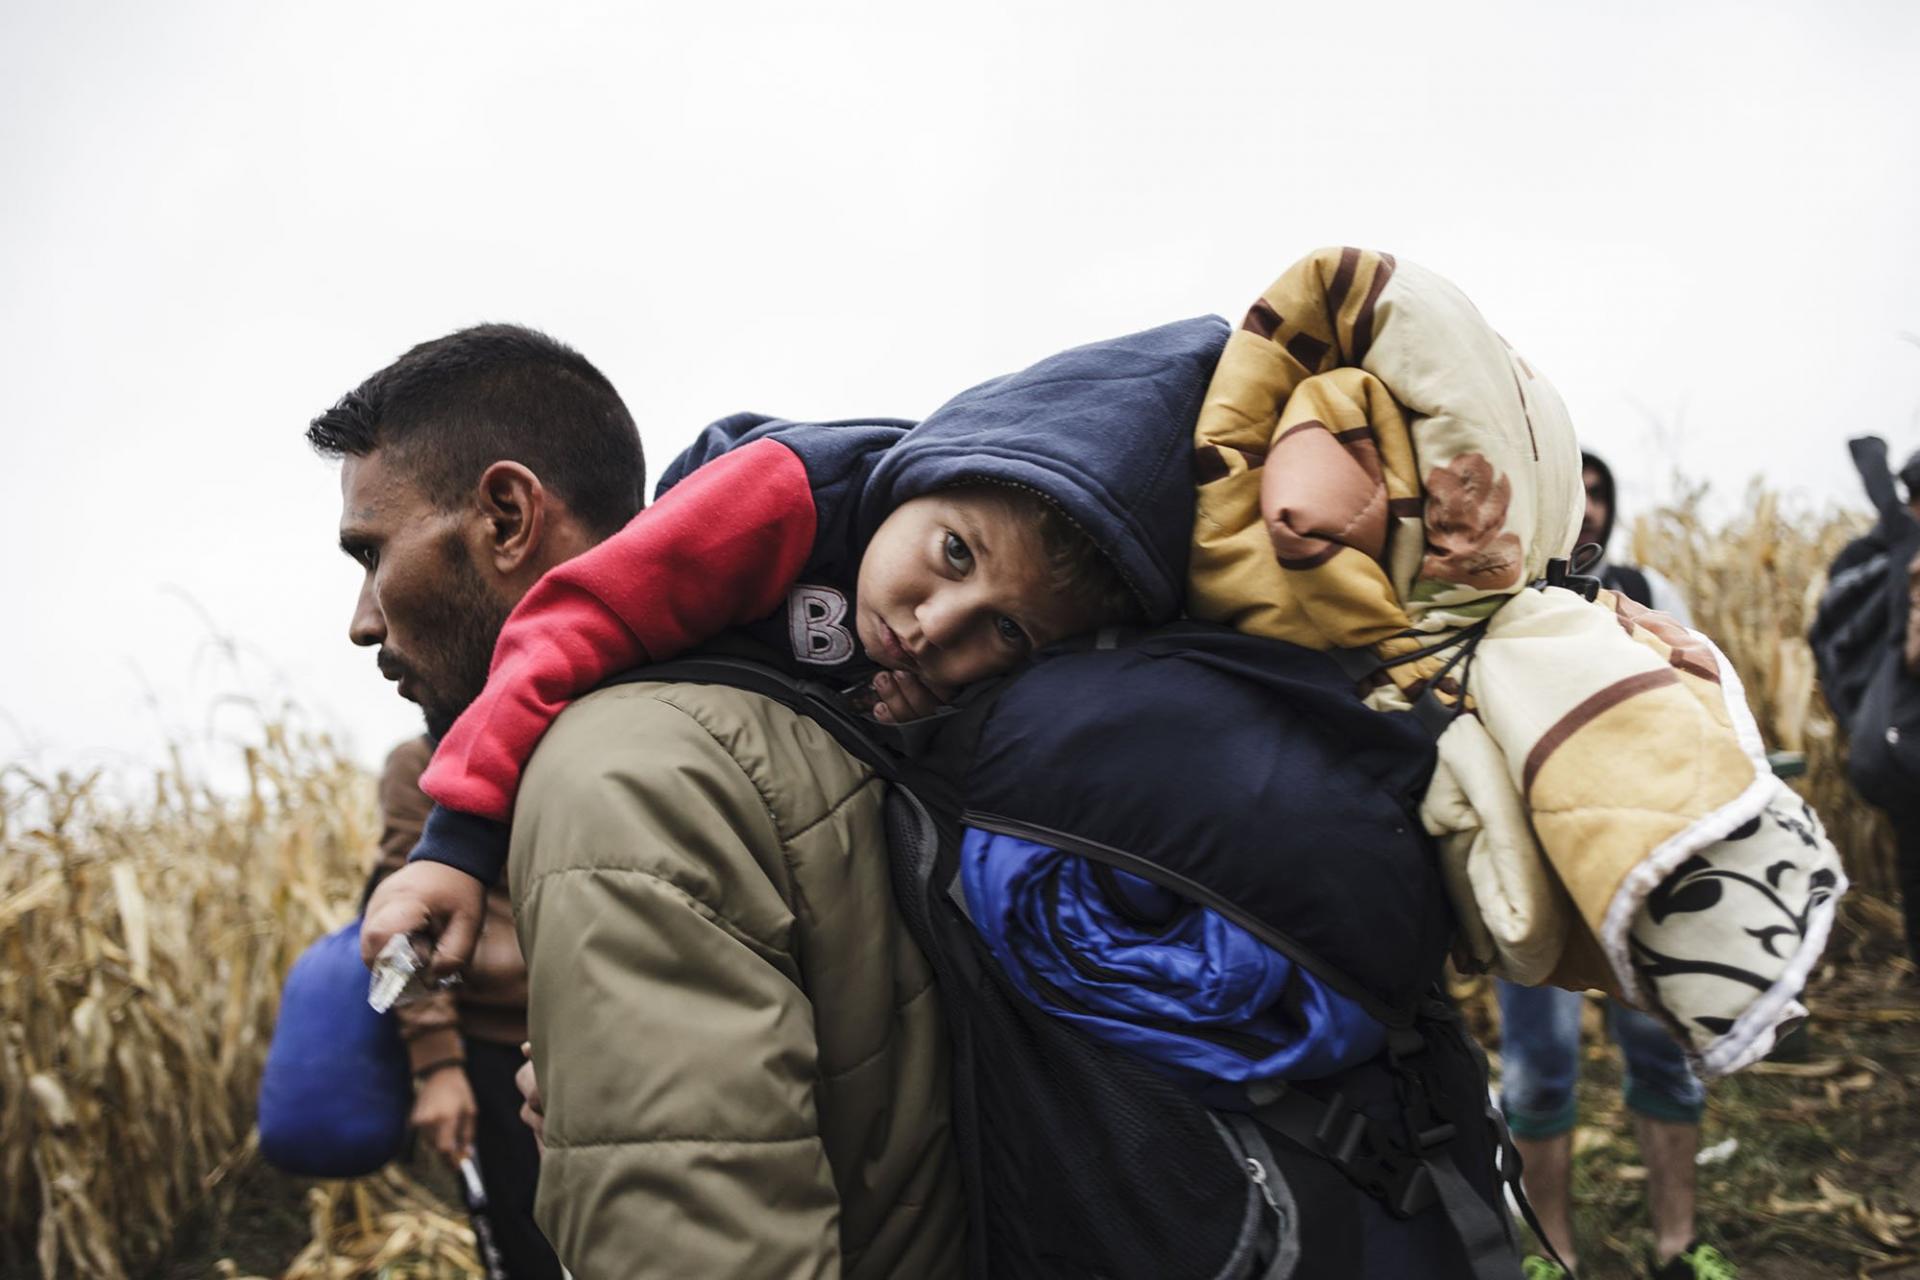 Refugee Crisis in Europe "The determination of the refugees to reach